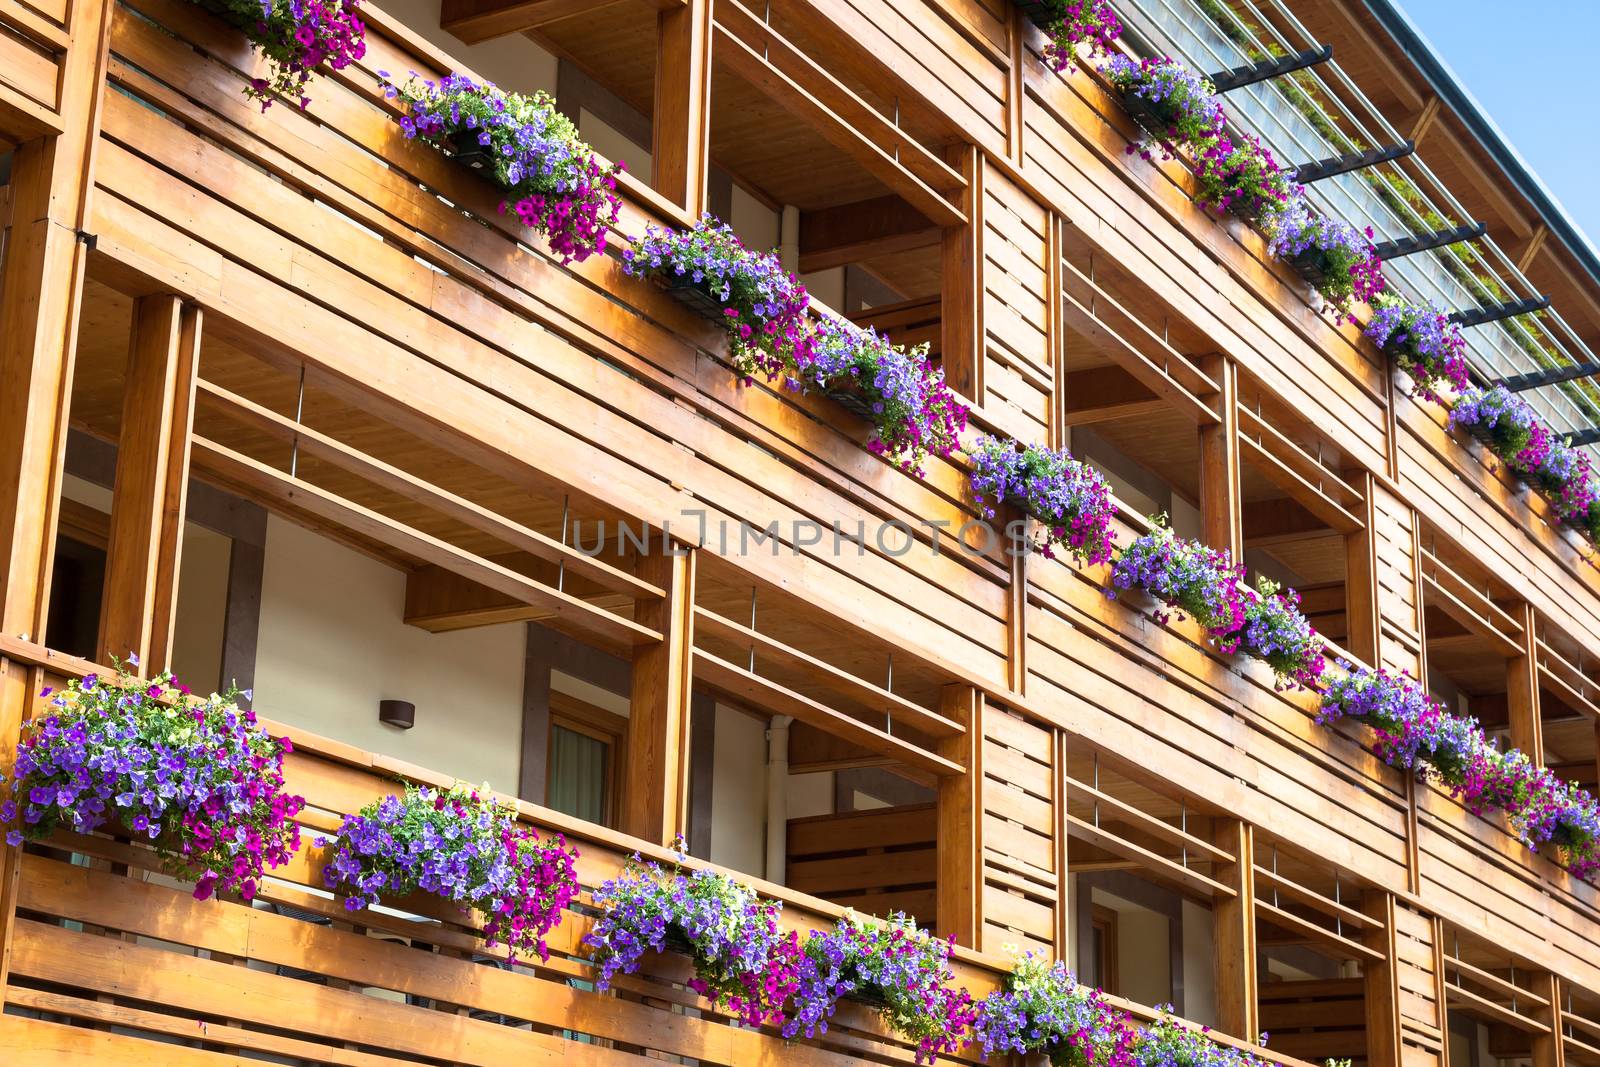 Flowers on Chalet balcony by Perseomedusa